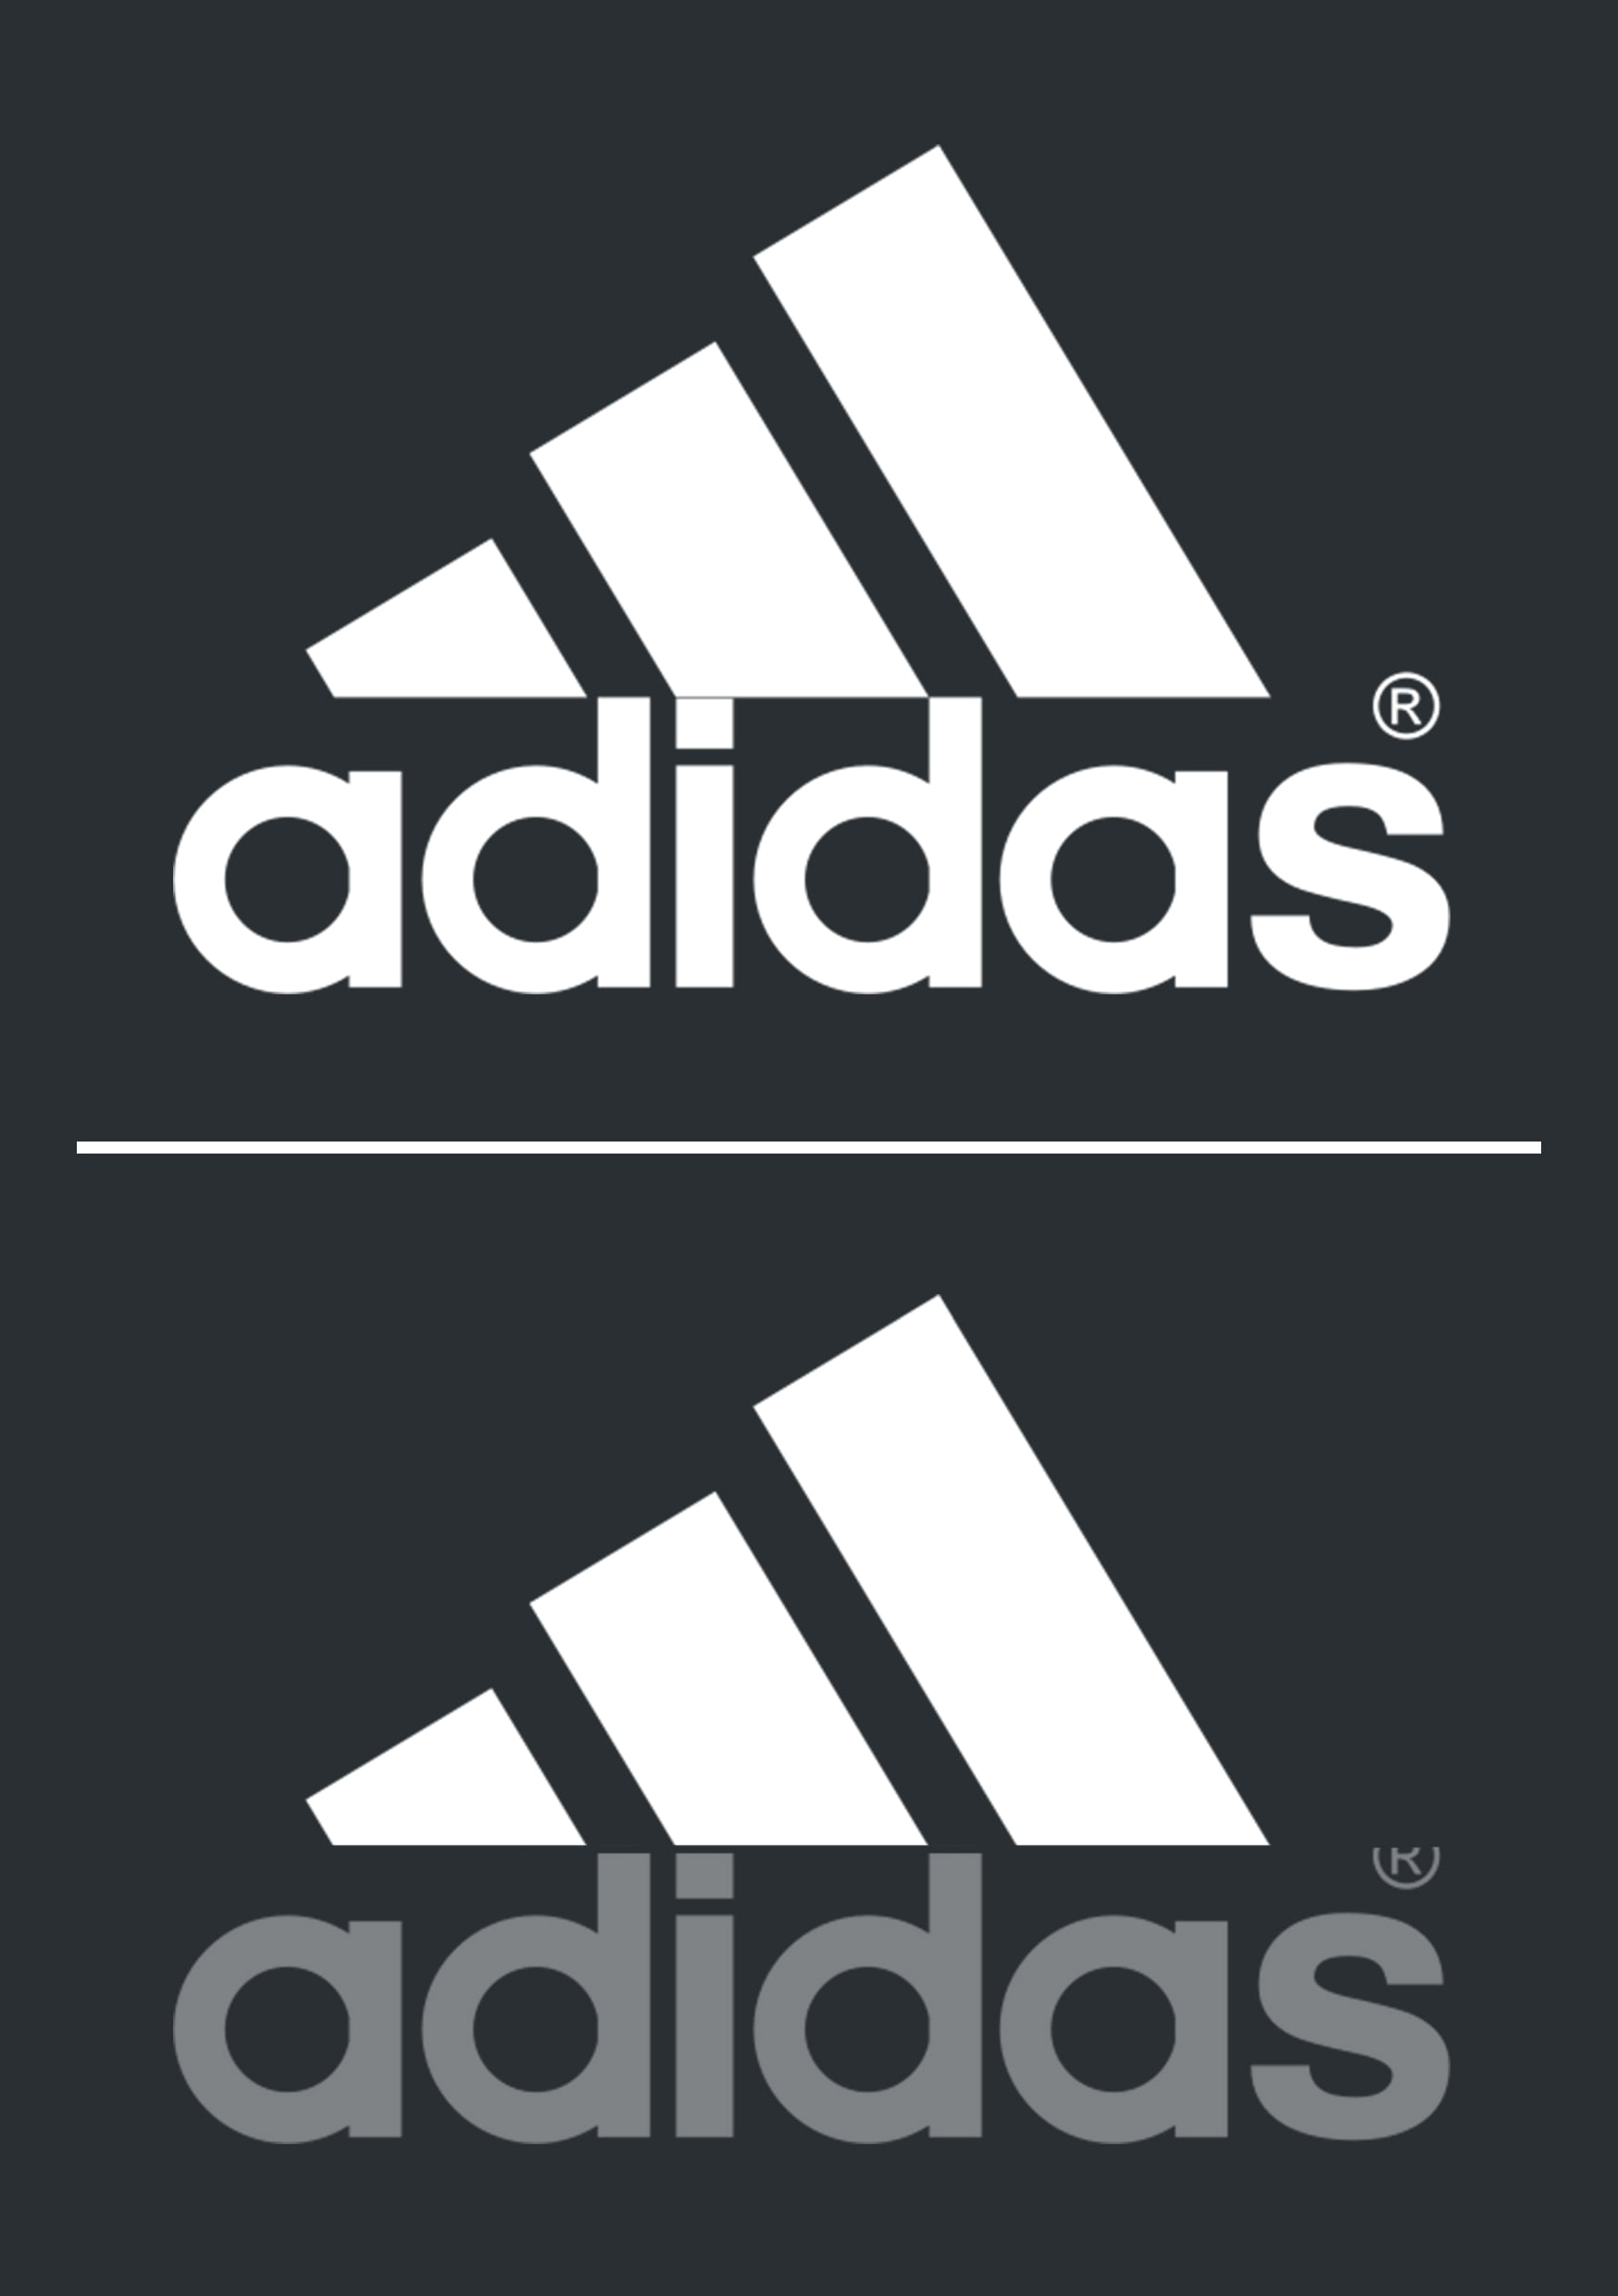 adidas brand meaning